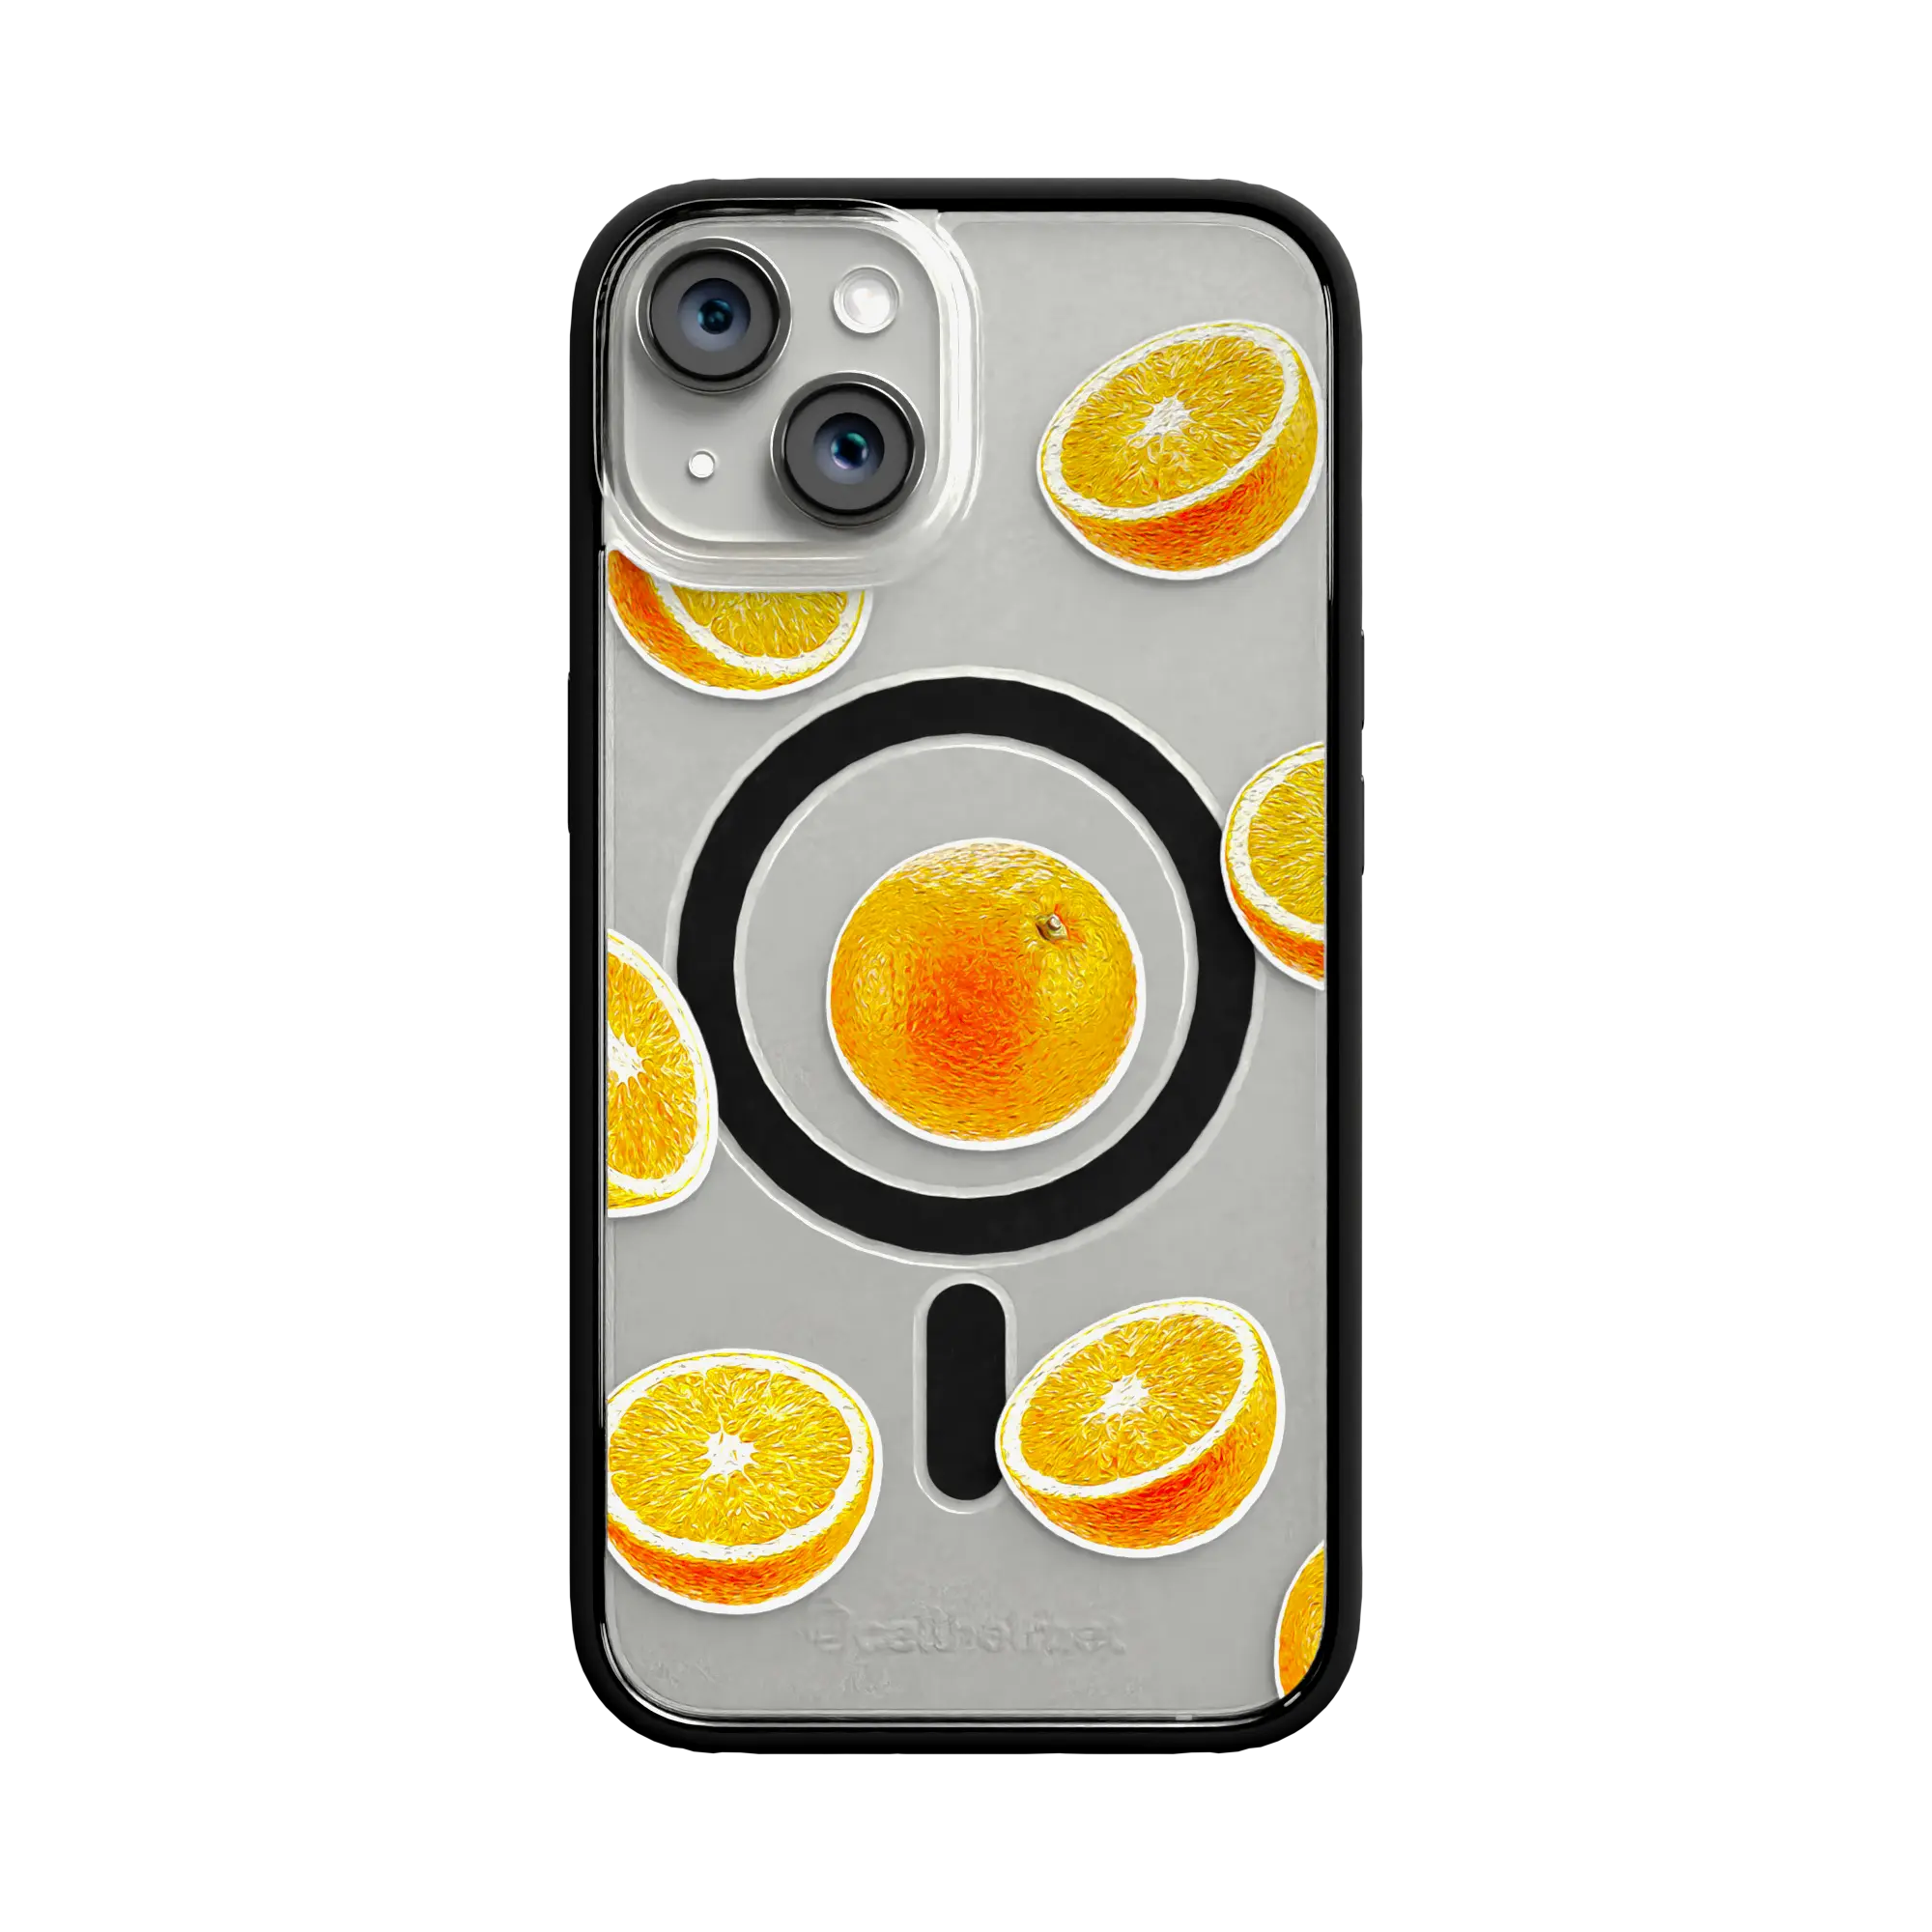 Apple-iPhone-12-12-Pro-Crystal-Clear Orange Zest | Protective MagSafe Case | Fruits Collection for Apple iPhone 12 Series cellhelmet cellhelmet